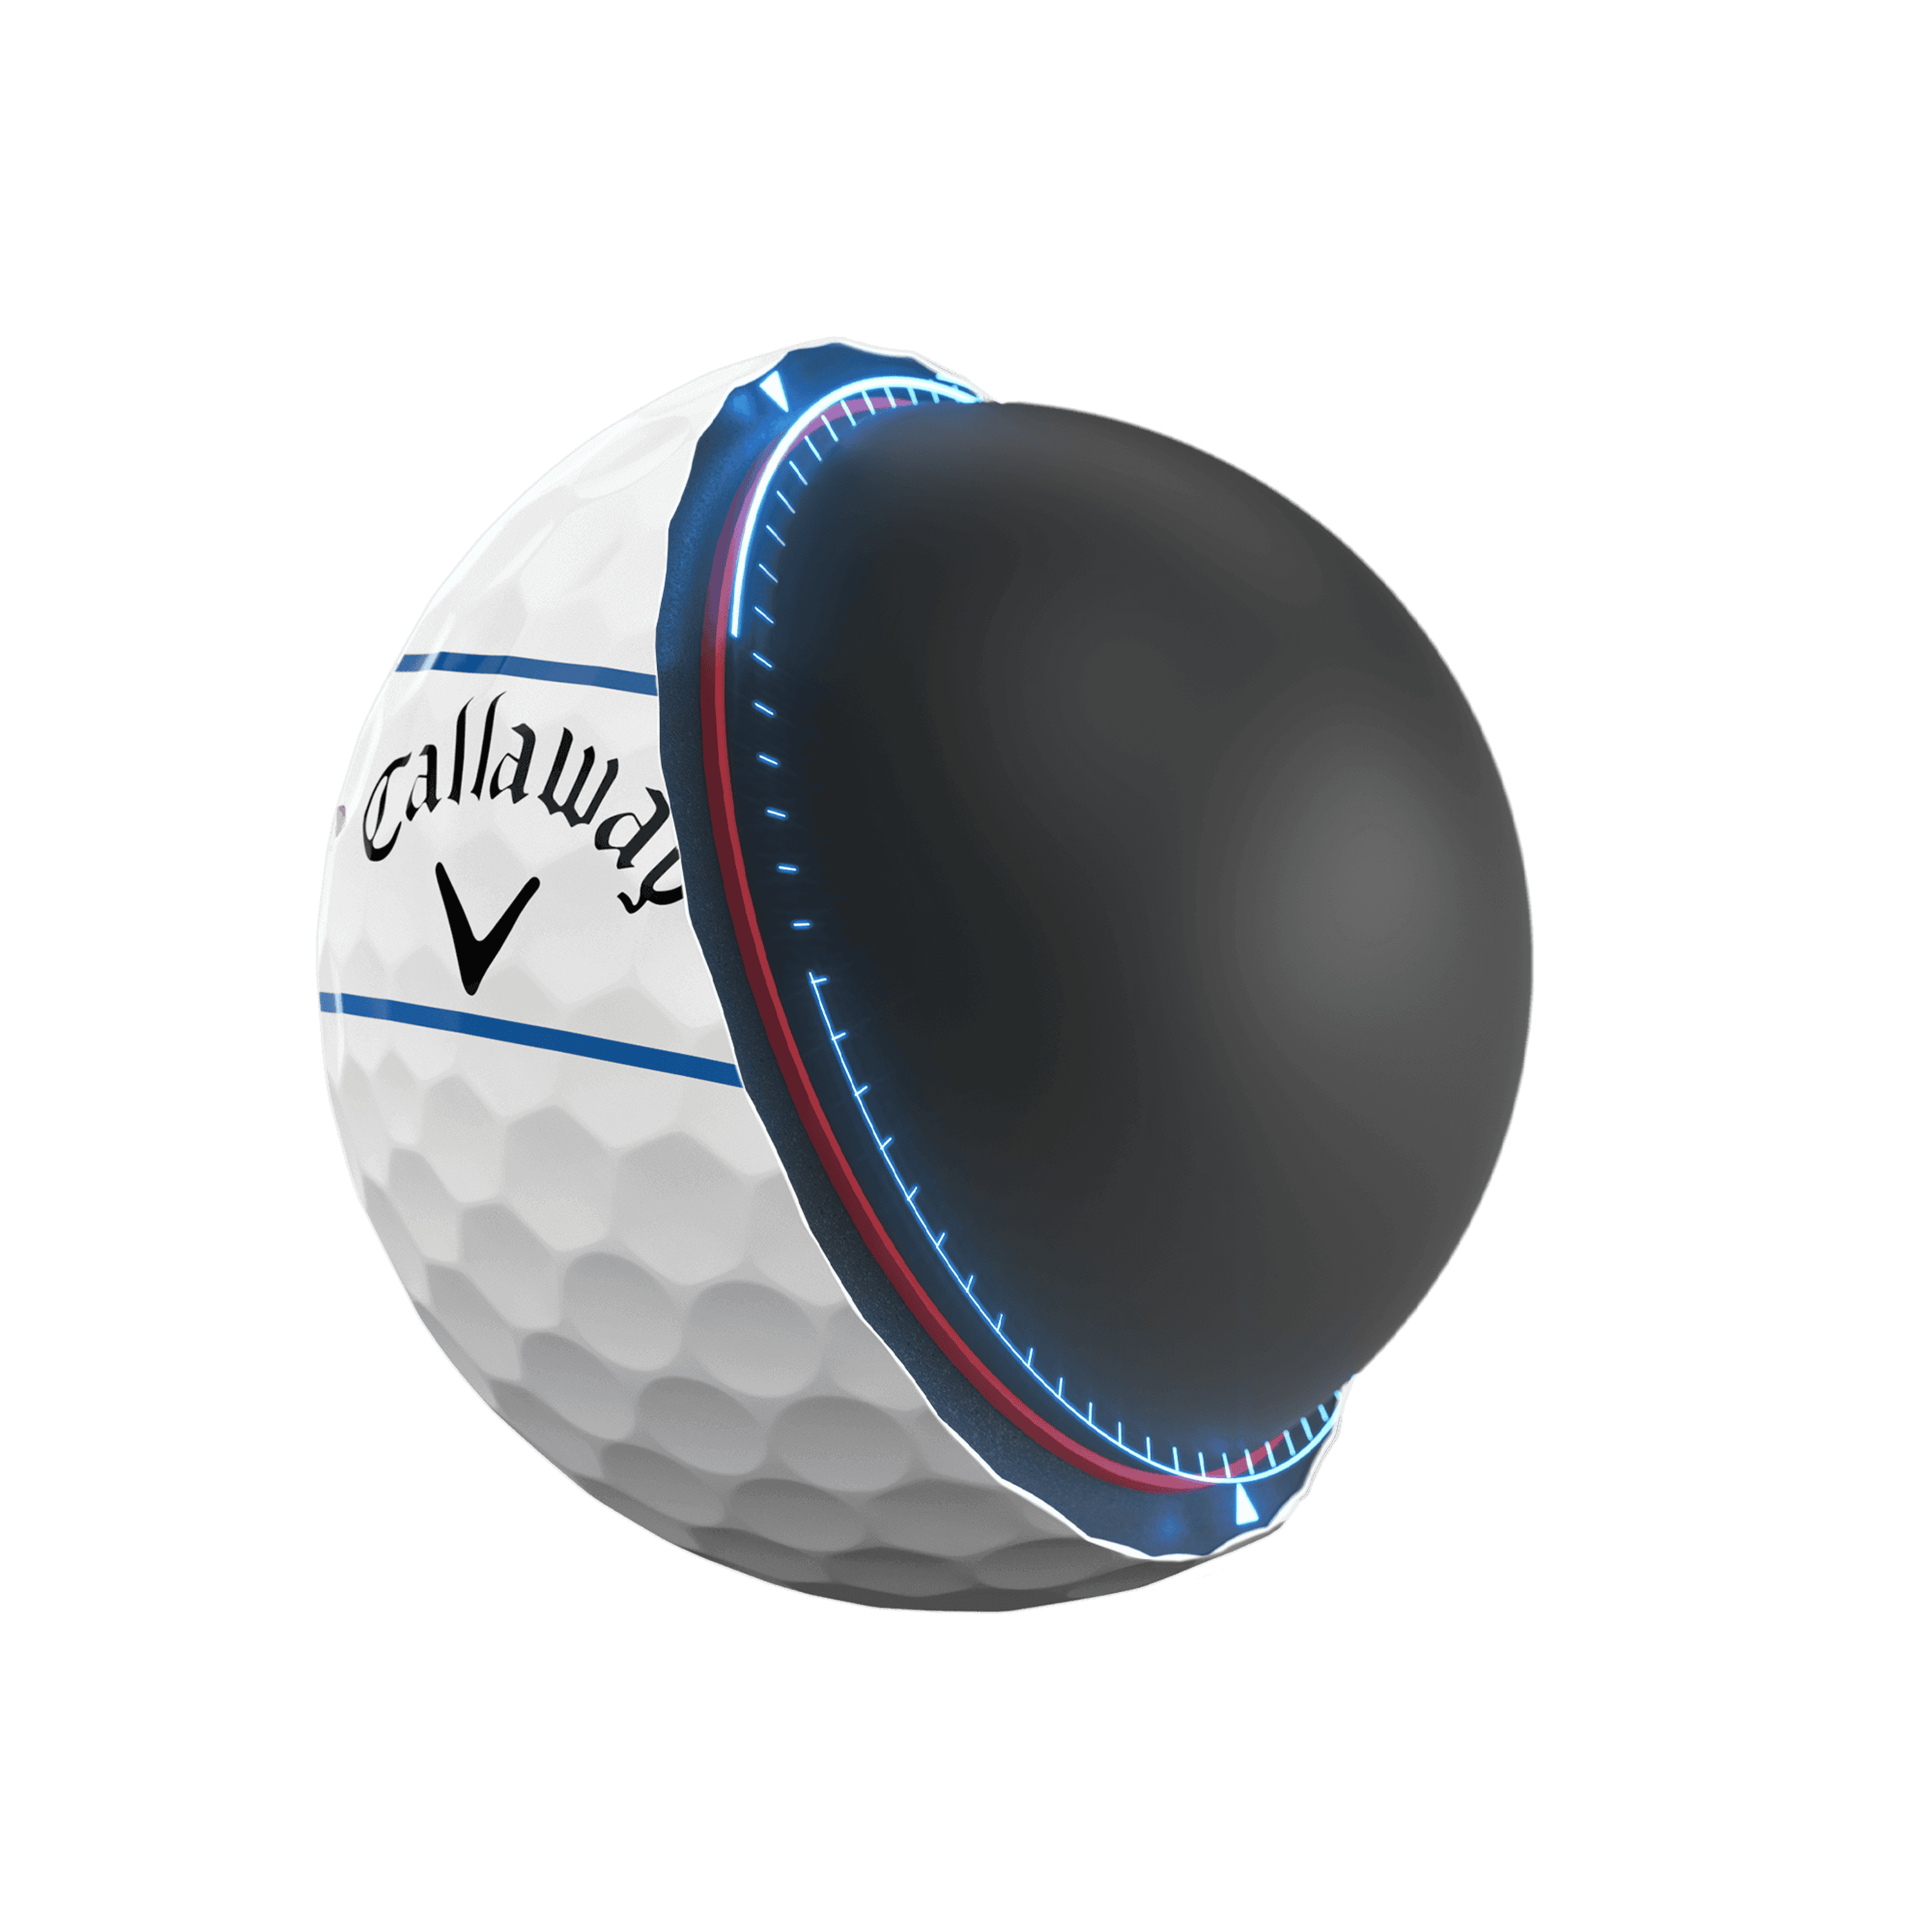 Chrome Tour X 360 Triple Track White Golf Balls features and benefits